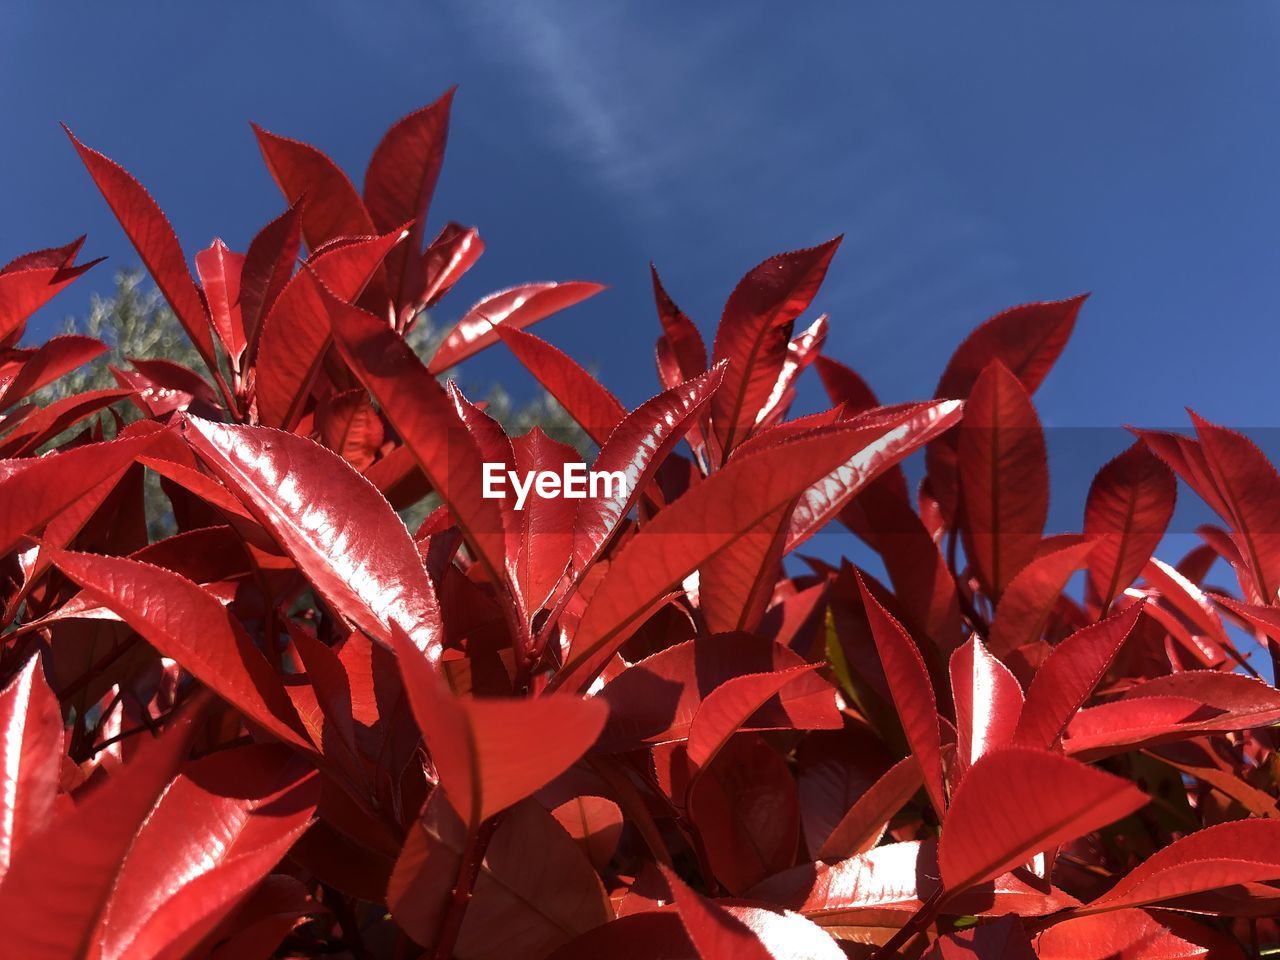 CLOSE-UP OF RED PLANT